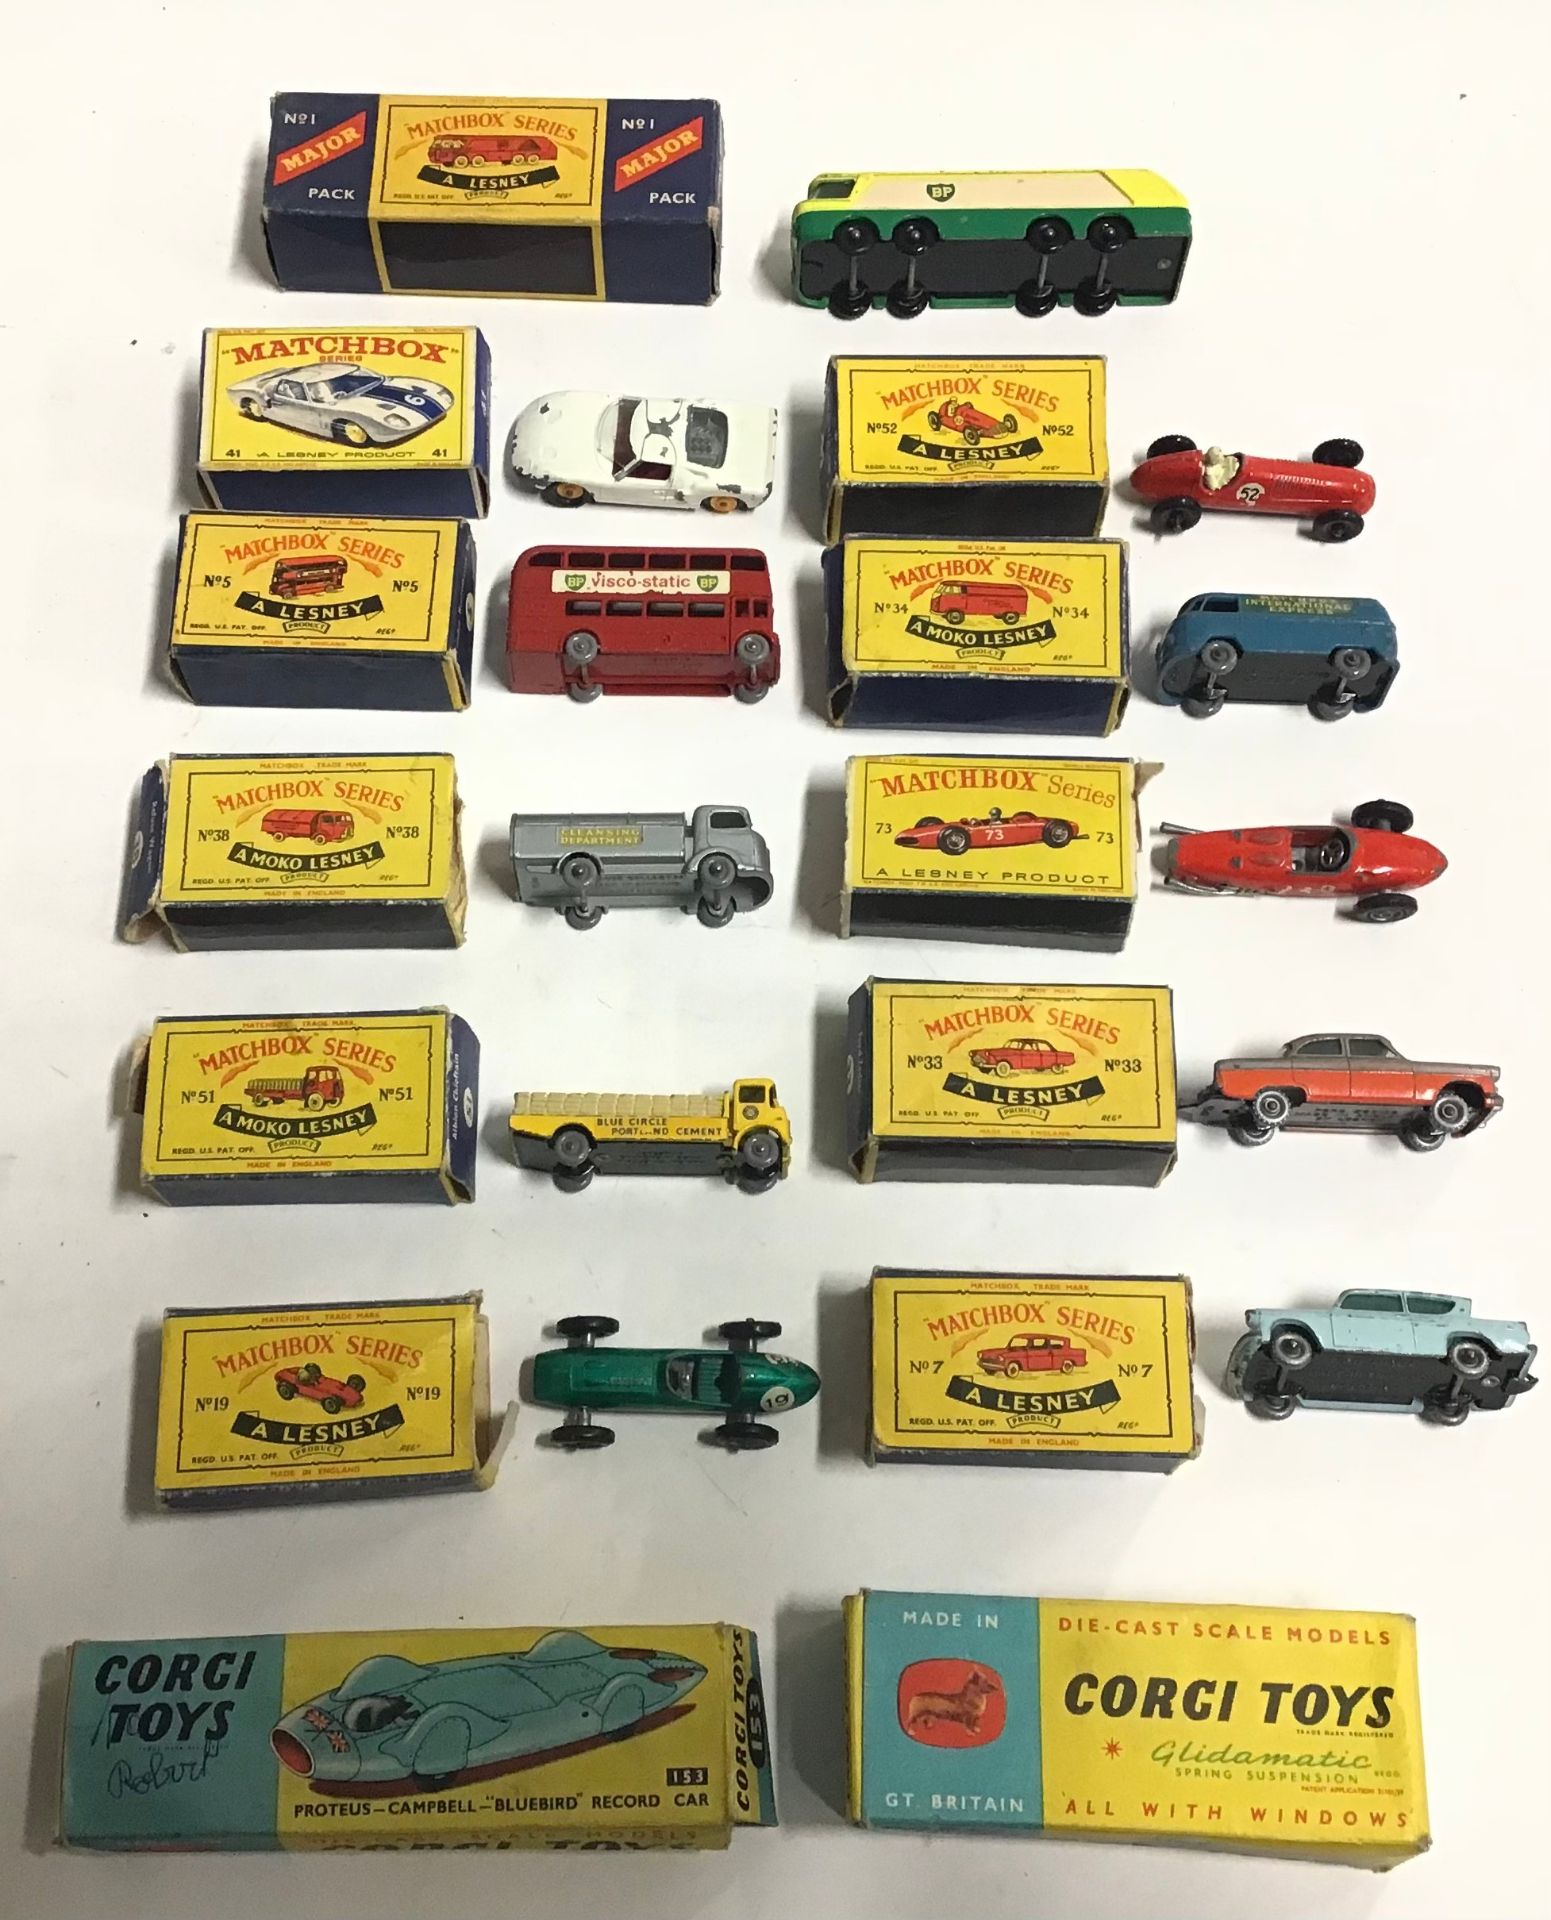 Mixed diecast group to include boxed Matchbox models 52 Maserati, 34 Volkswagen MicroVan, 5 London